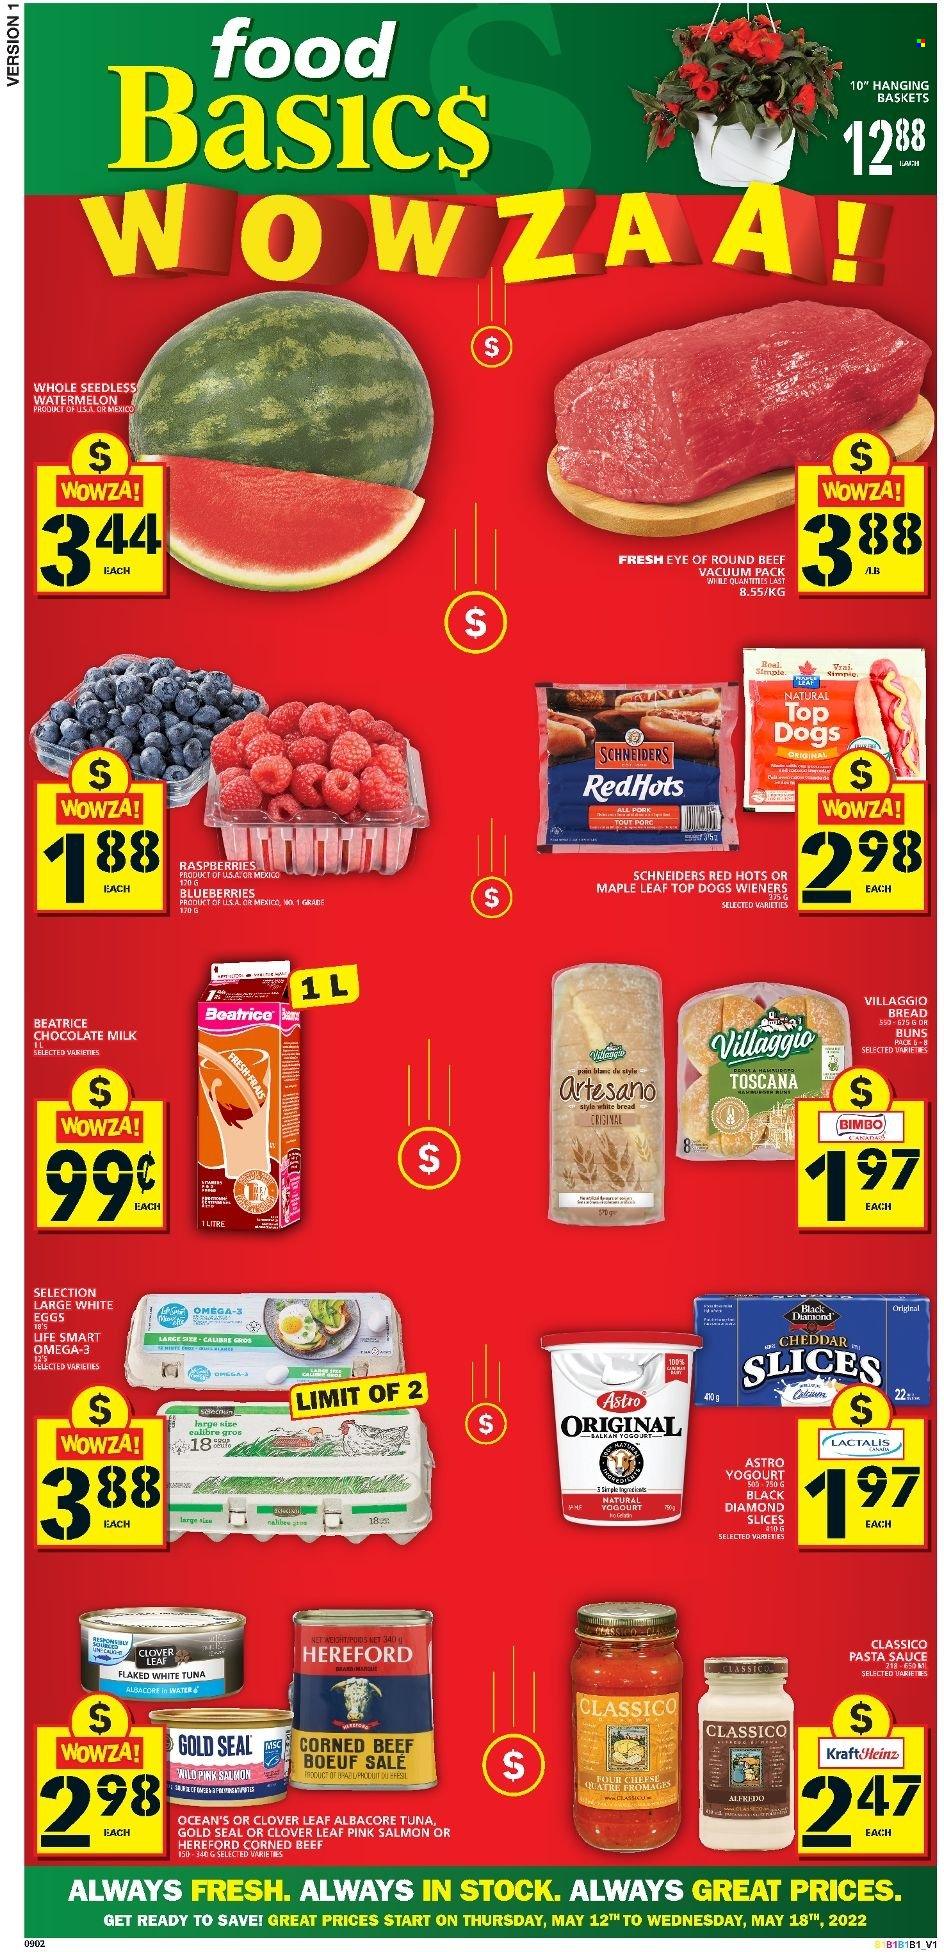 thumbnail - Food Basics Flyer - May 12, 2022 - May 18, 2022 - Sales products - bread, white bread, buns, blueberries, watermelon, salmon, pasta sauce, sauce, corned beef, cheddar, cheese, Clover, milk, eggs, milk chocolate, chocolate, Classico, beef meat, eye of round, basket, Omega-3. Page 1.